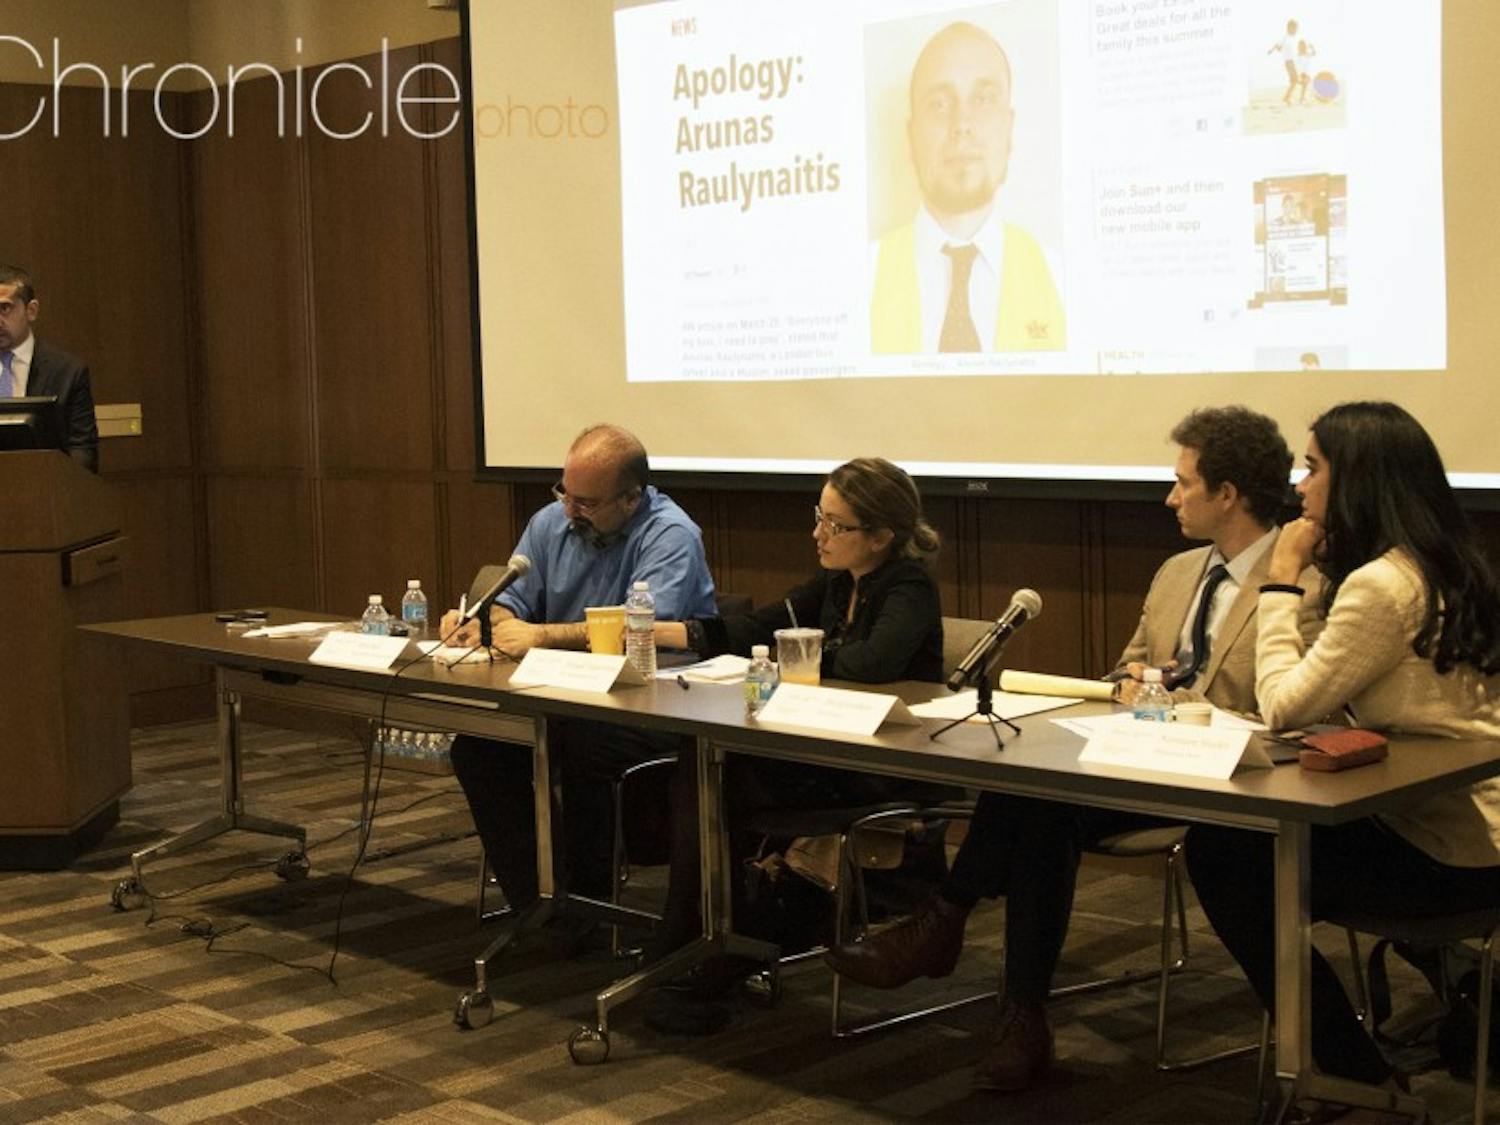 During the event, panelists said that more in-depth journalism about the everyday lives of Muslims is necessary to combat negative perceptions of Islam in the media.&nbsp;